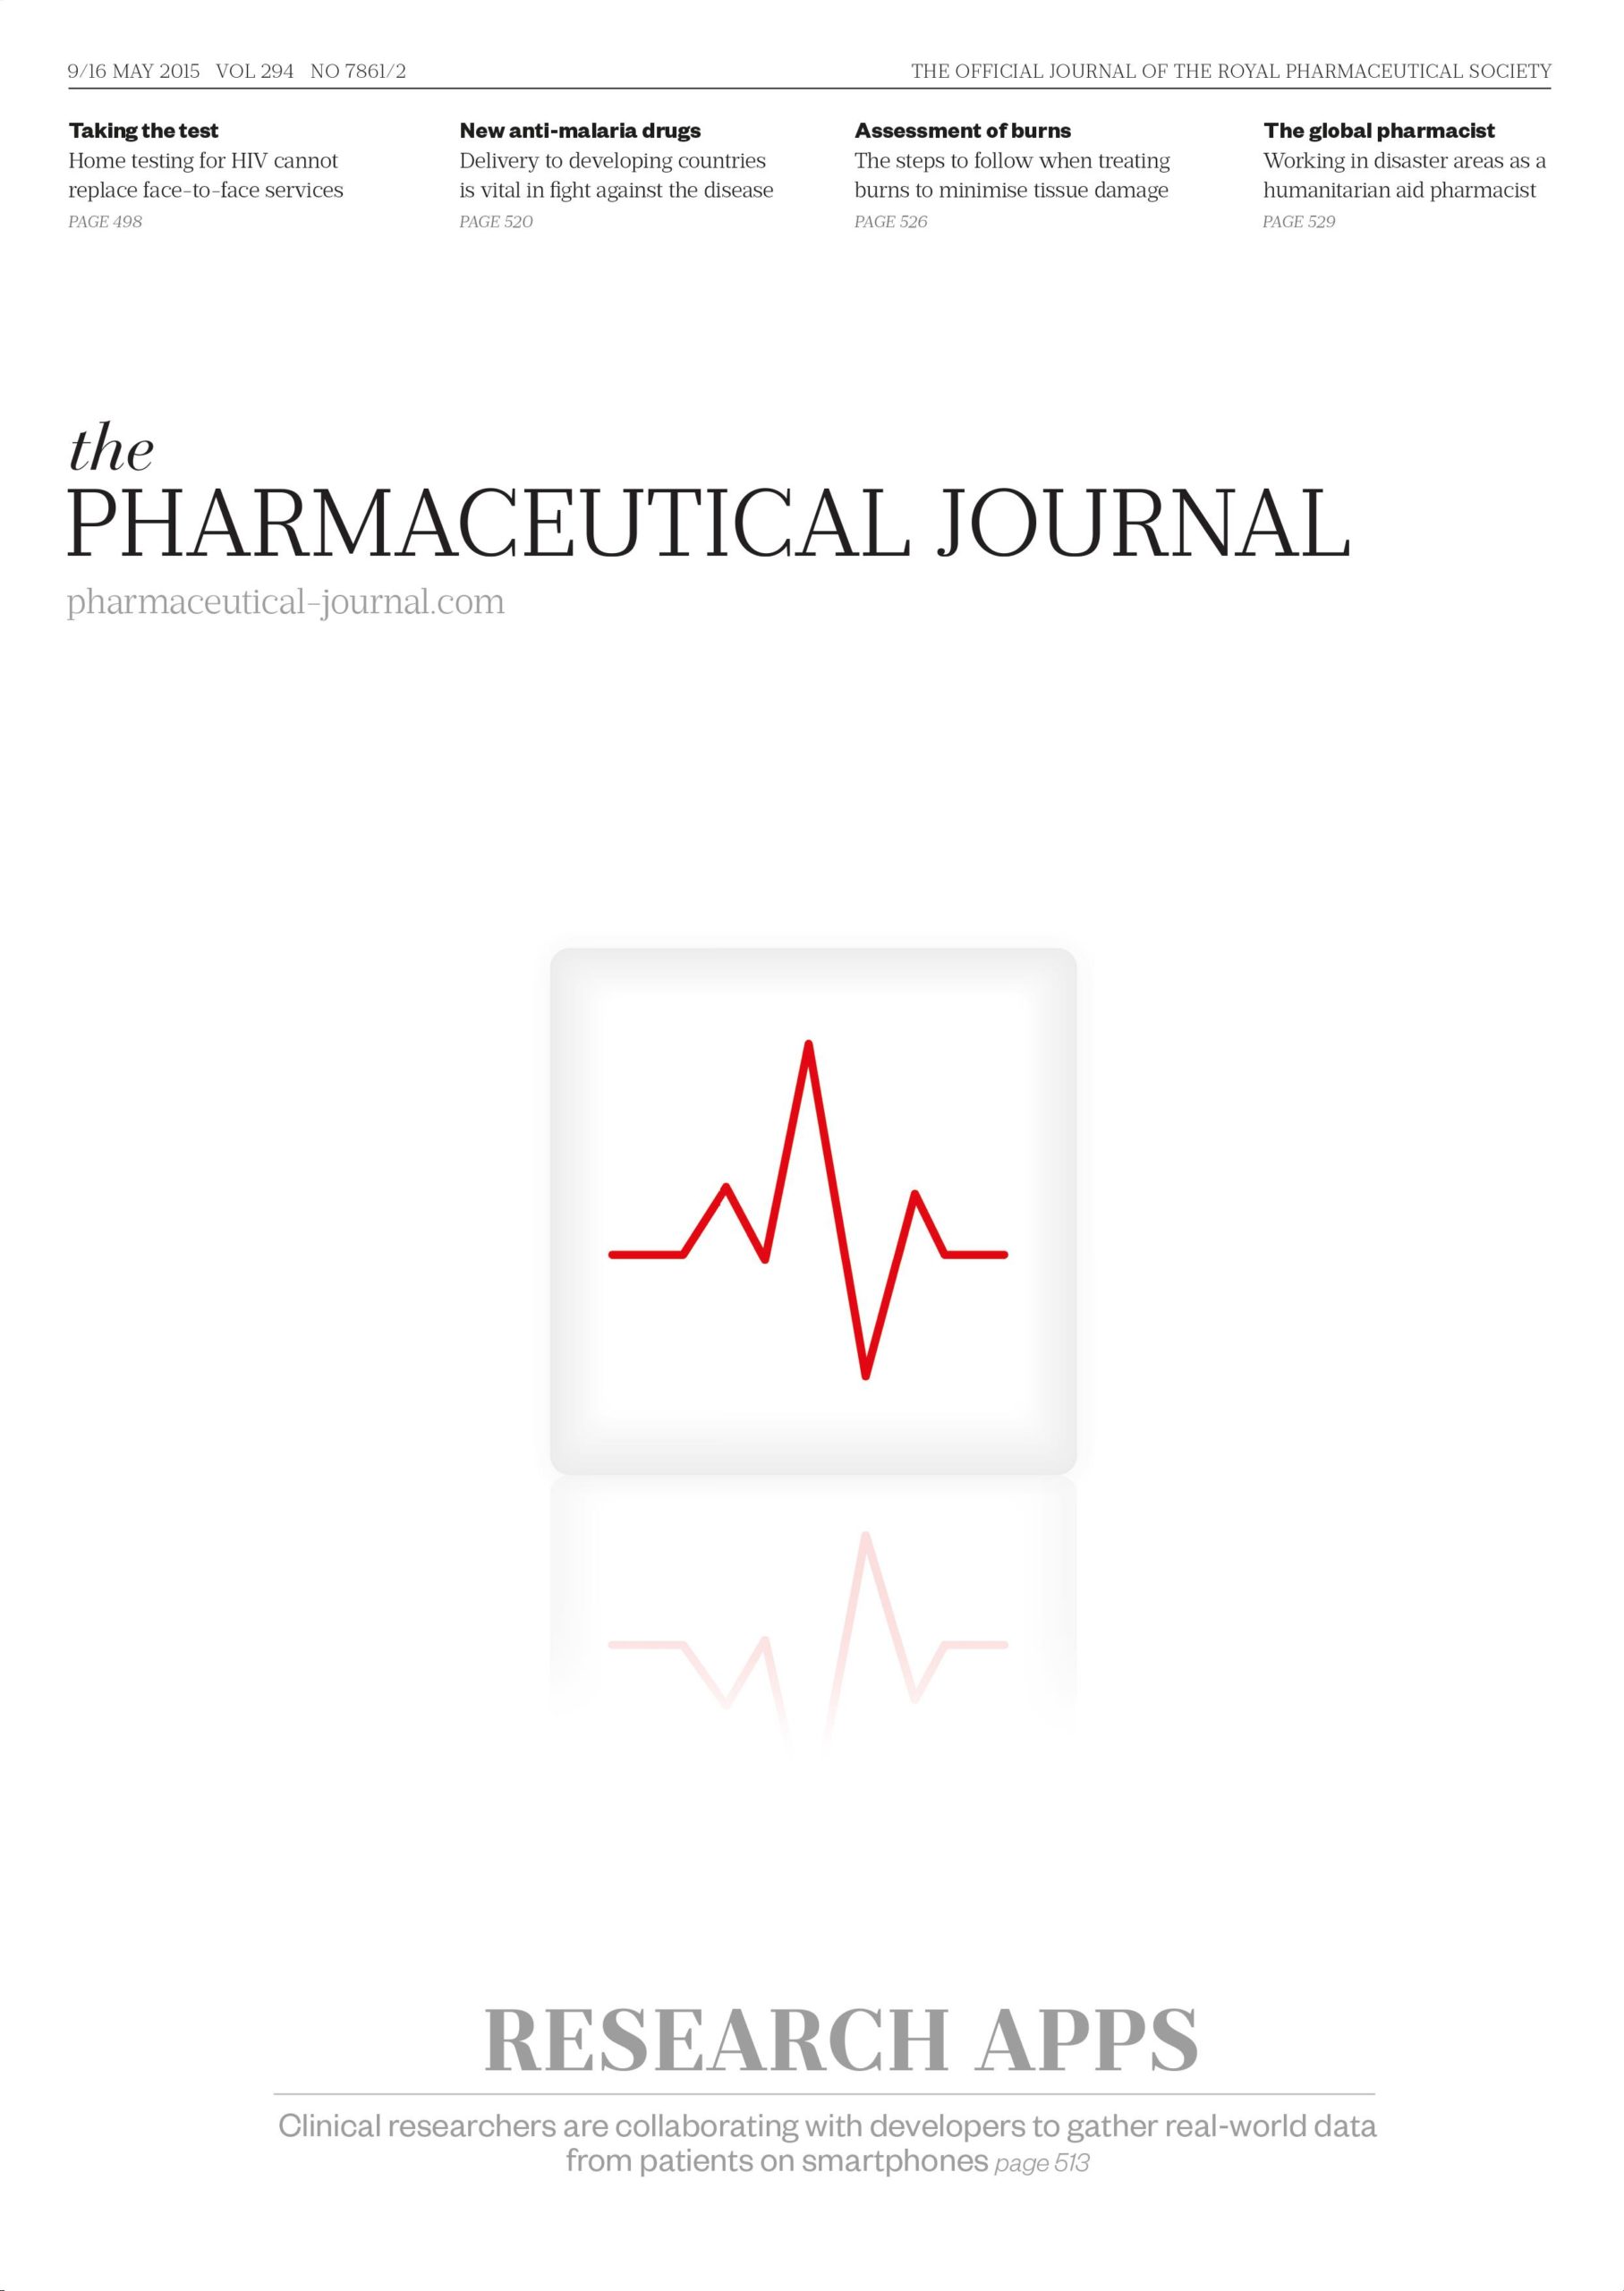 Publication issue cover for PJ, 9/16 May 2015, Vol 294, No 7861/2